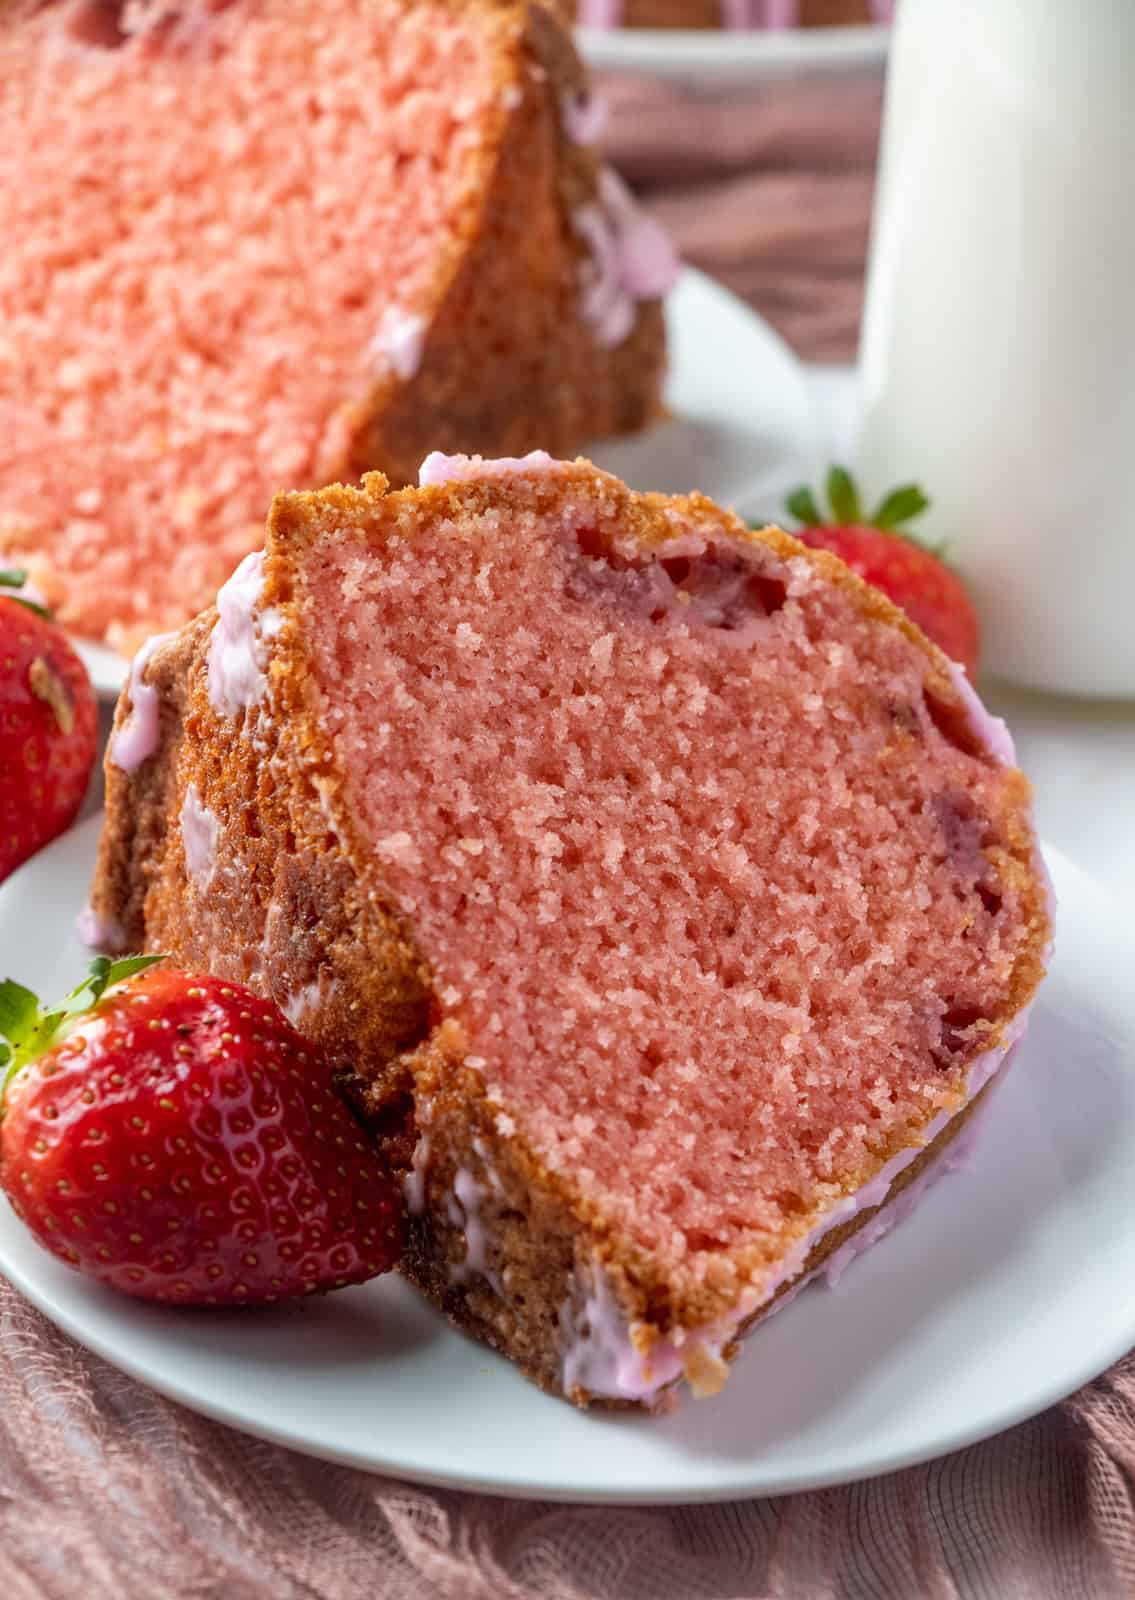 Close up of sliced piece of cake on white plate with strawberry garnish on plate